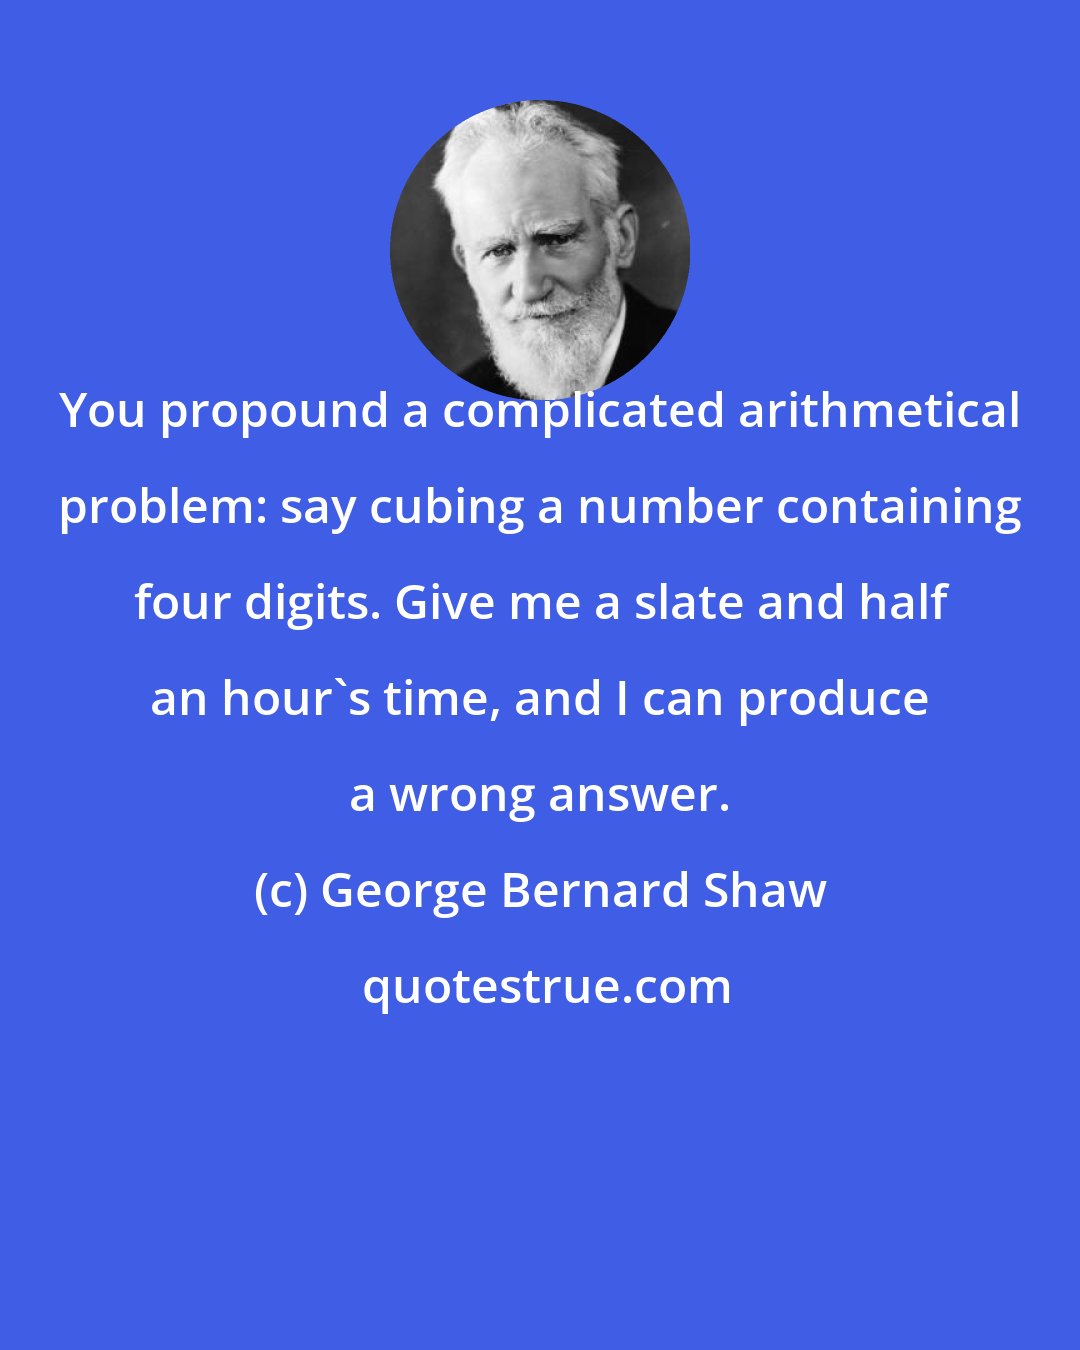 George Bernard Shaw: You propound a complicated arithmetical problem: say cubing a number containing four digits. Give me a slate and half an hour's time, and I can produce a wrong answer.